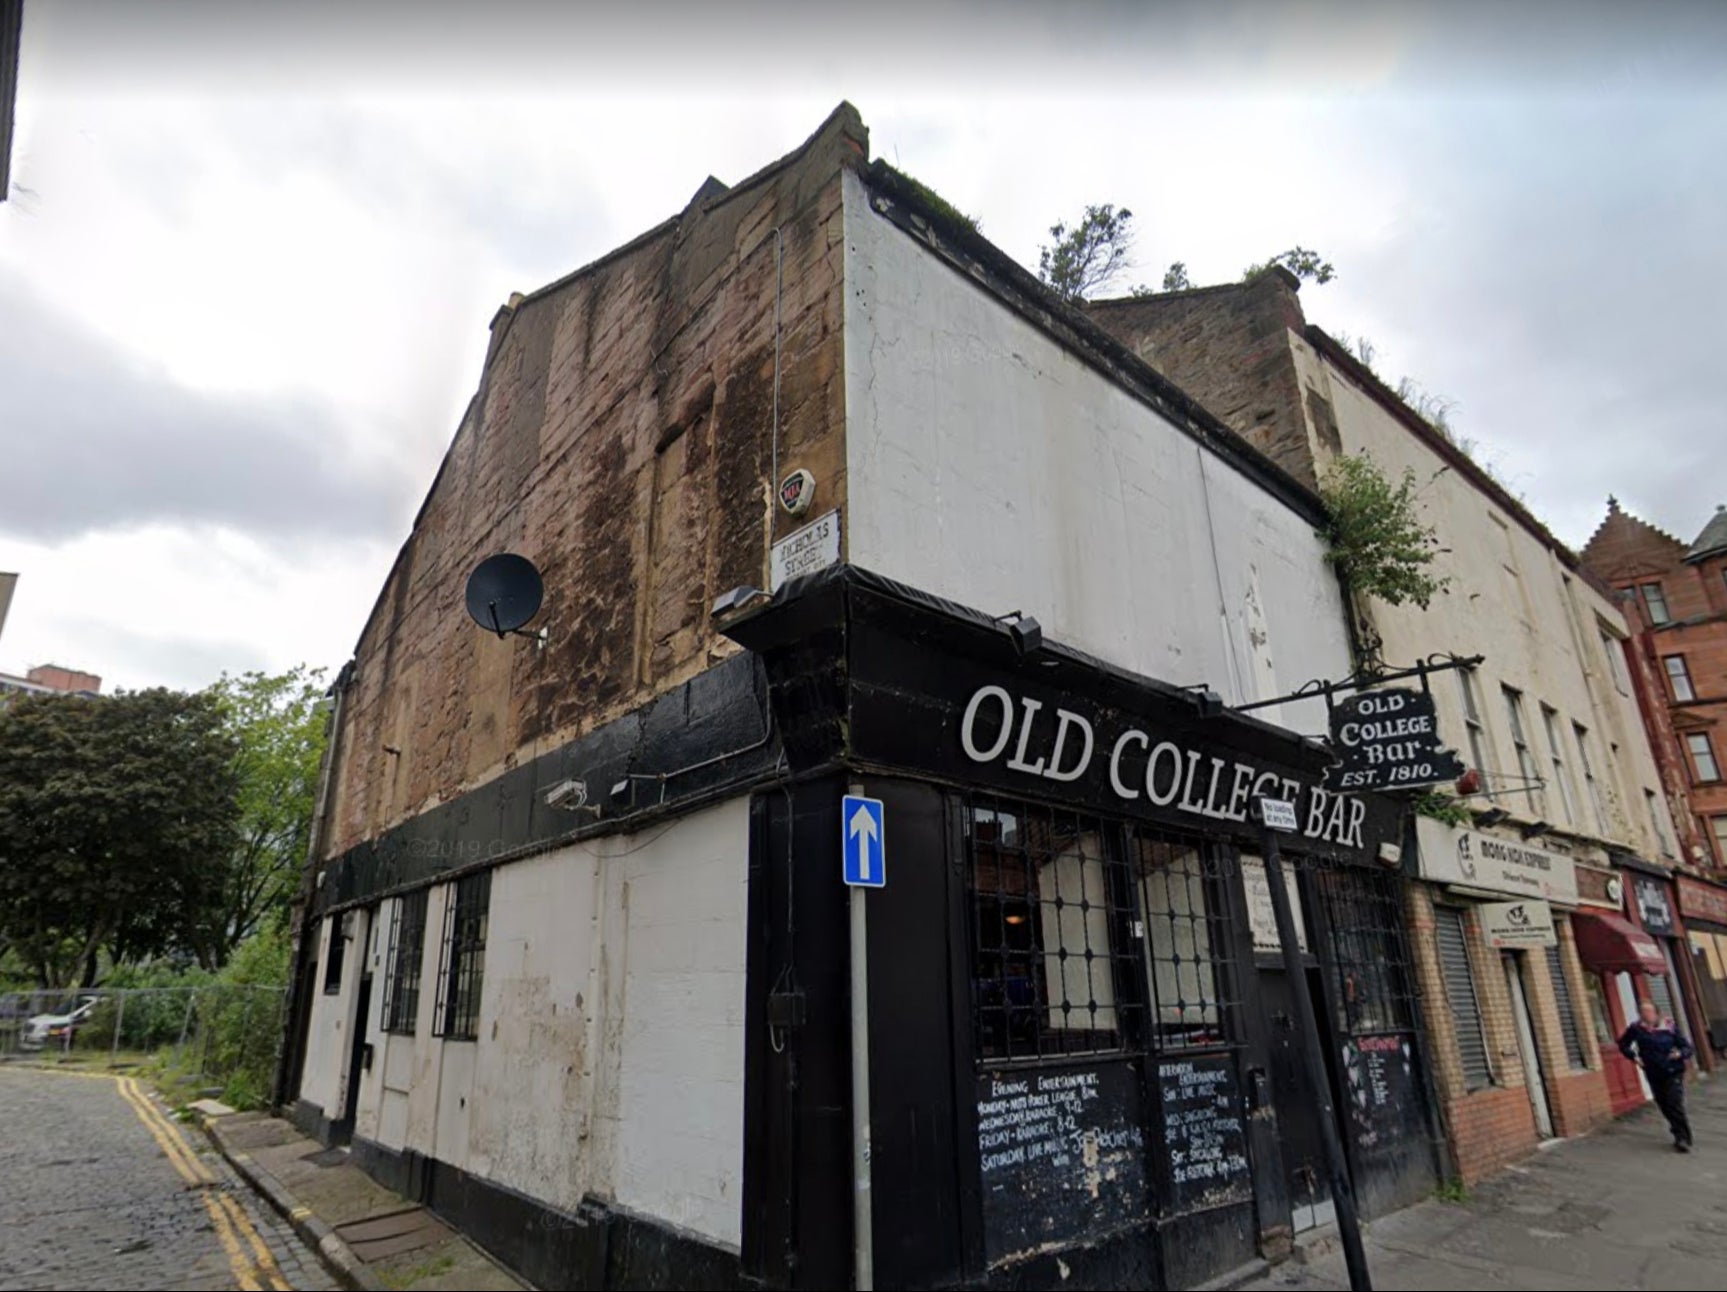 Police have appealed for any witnesses after the flames seriously damaged the run-down premises above the Old College Bar